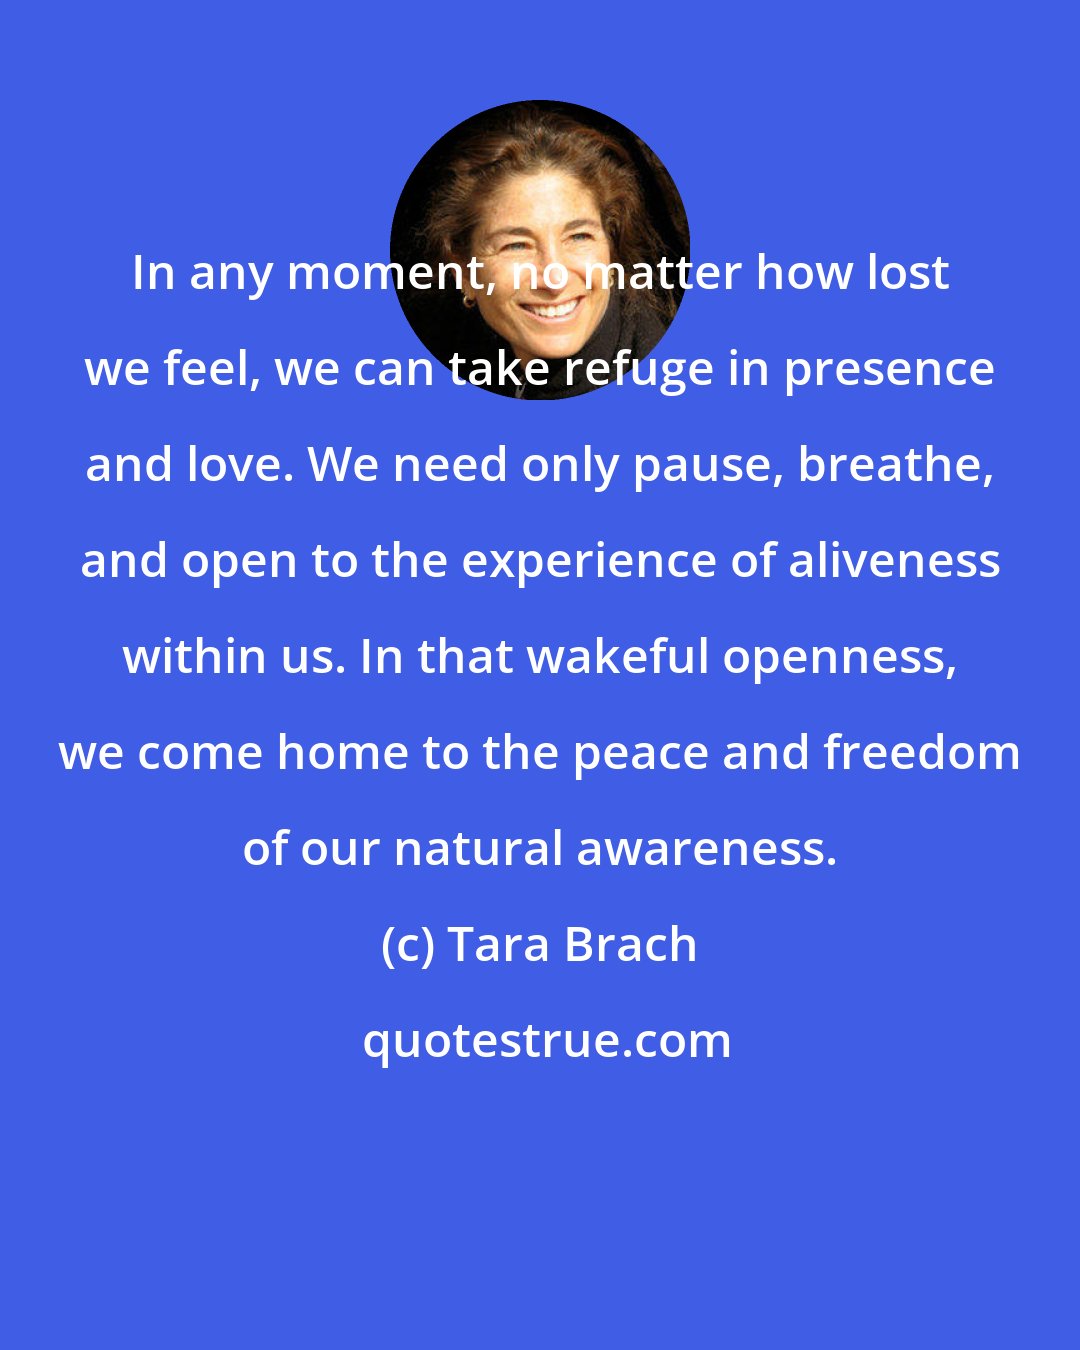 Tara Brach: In any moment, no matter how lost we feel, we can take refuge in presence and love. We need only pause, breathe, and open to the experience of aliveness within us. In that wakeful openness, we come home to the peace and freedom of our natural awareness.